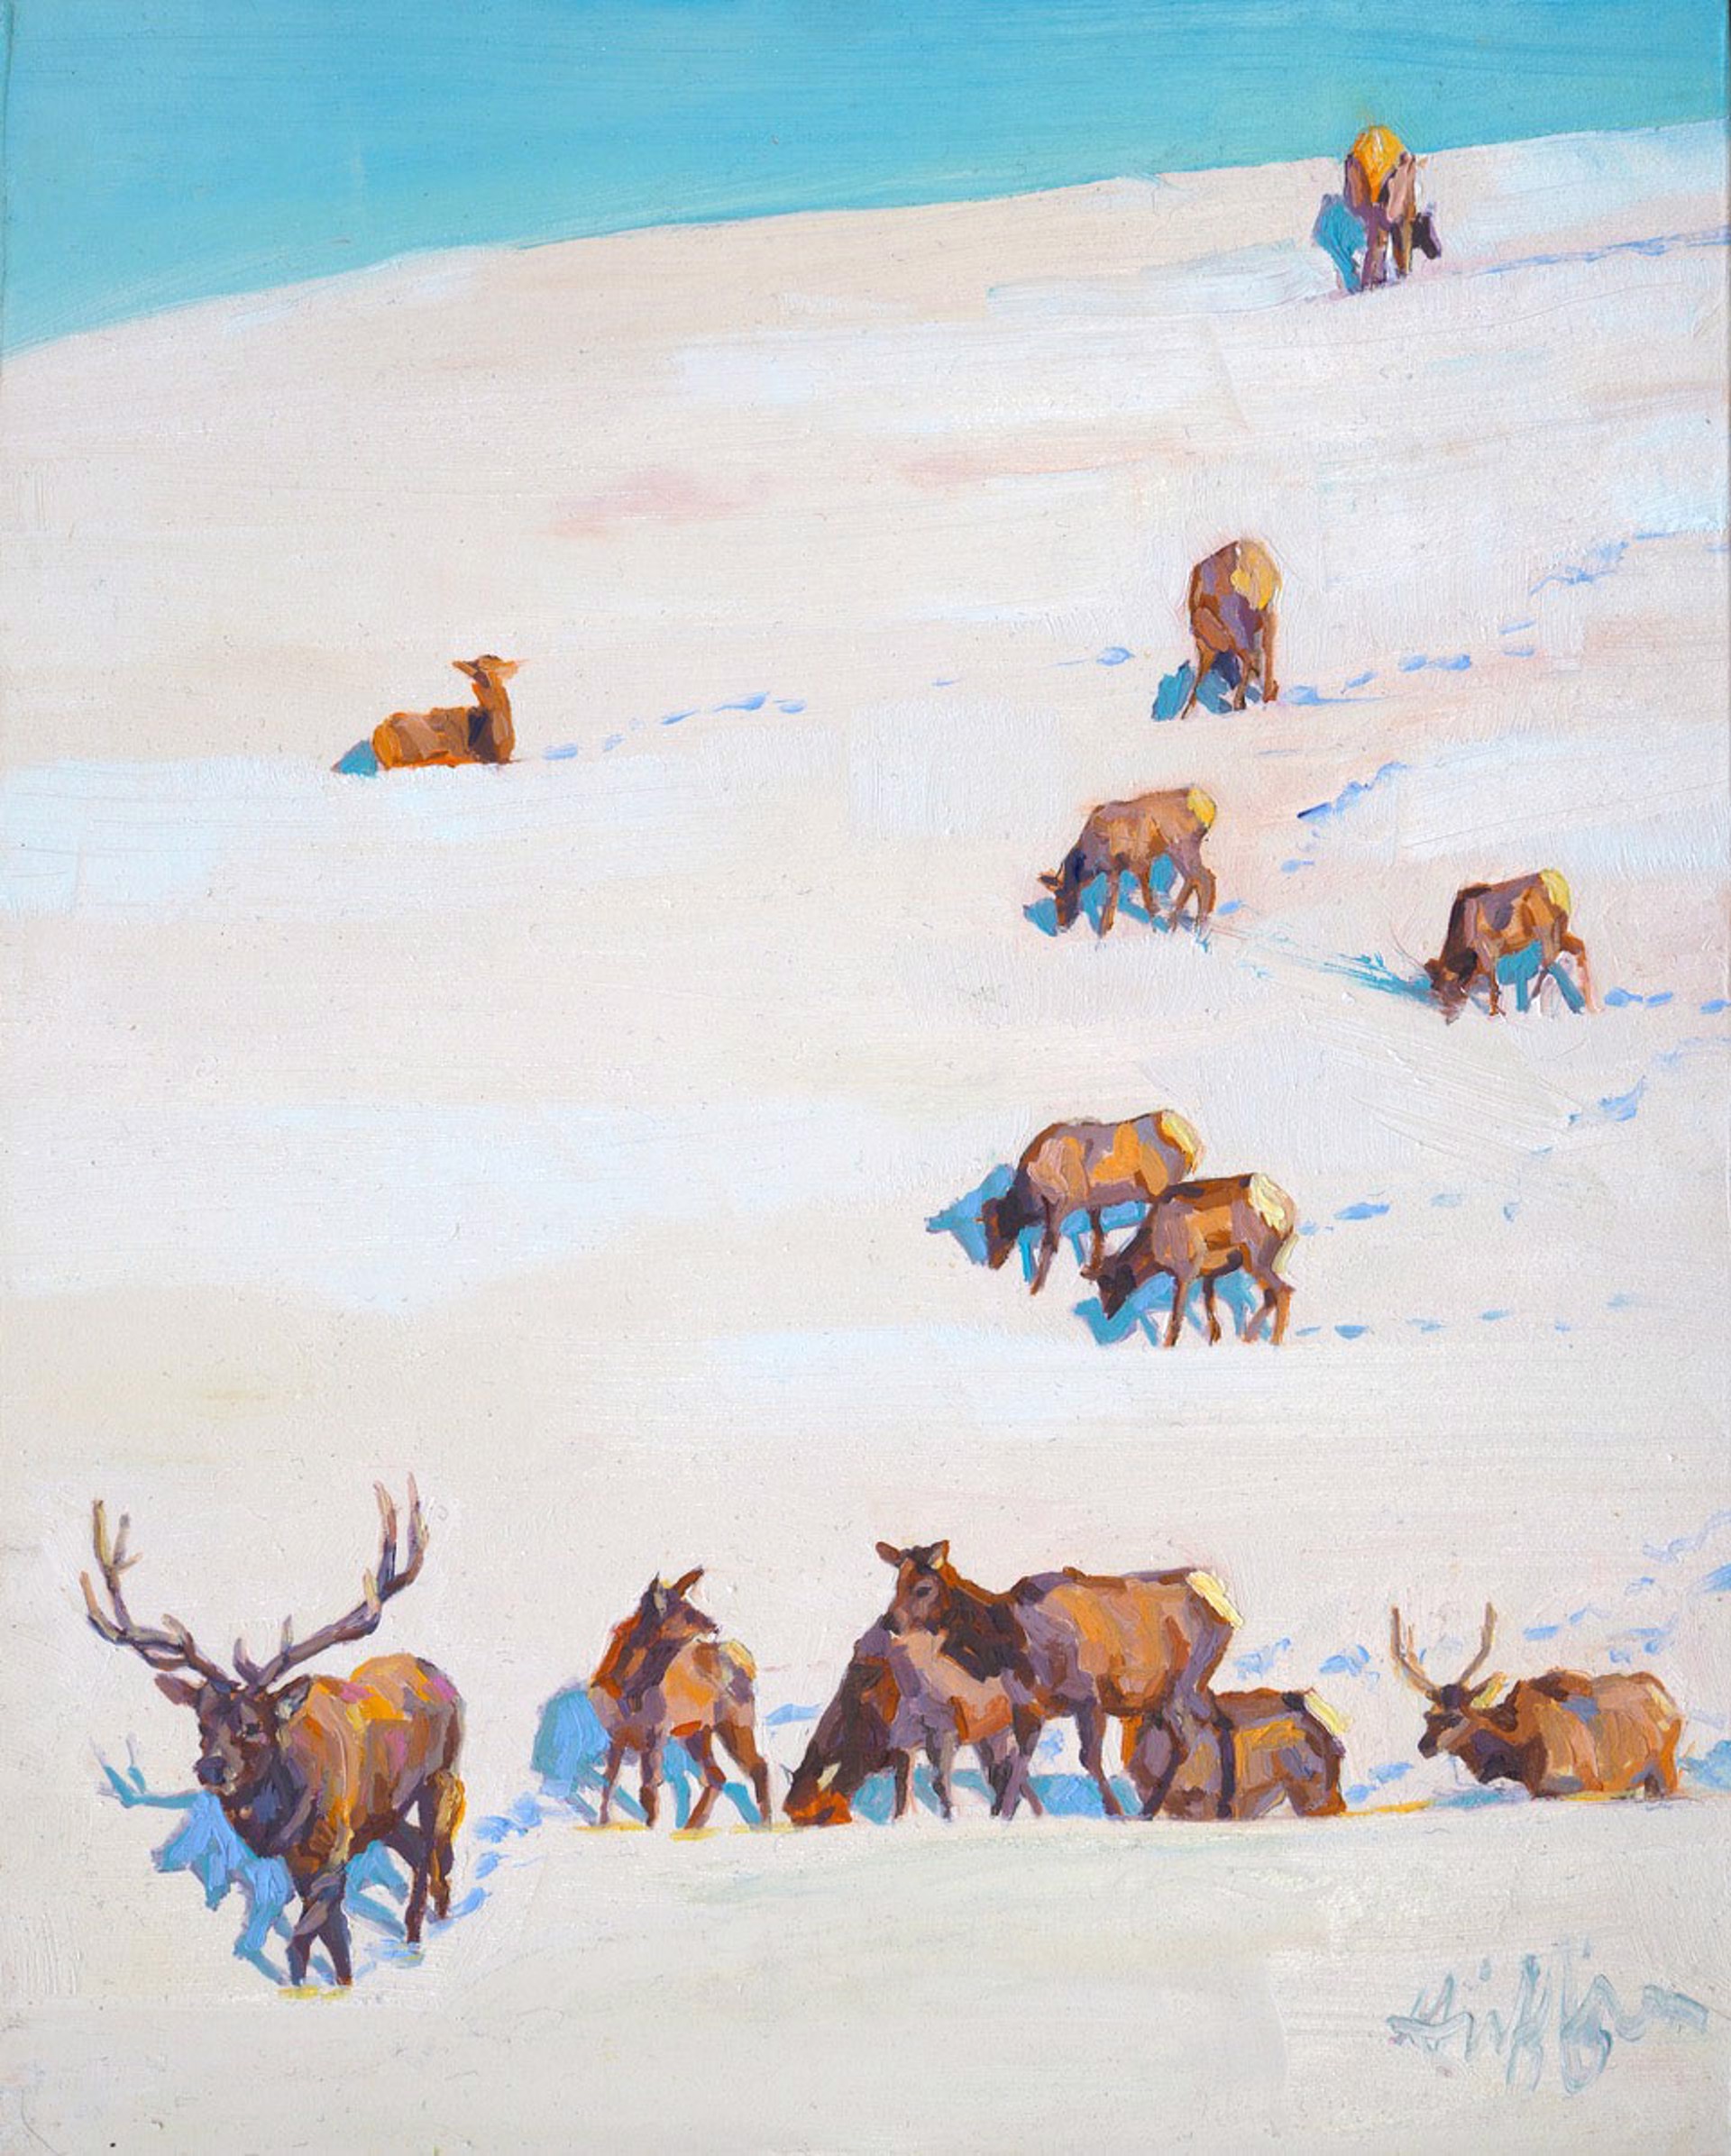 Original Oil Painting Featuring A Elk In Migration Led By Large Buck Through Snowy Landscape